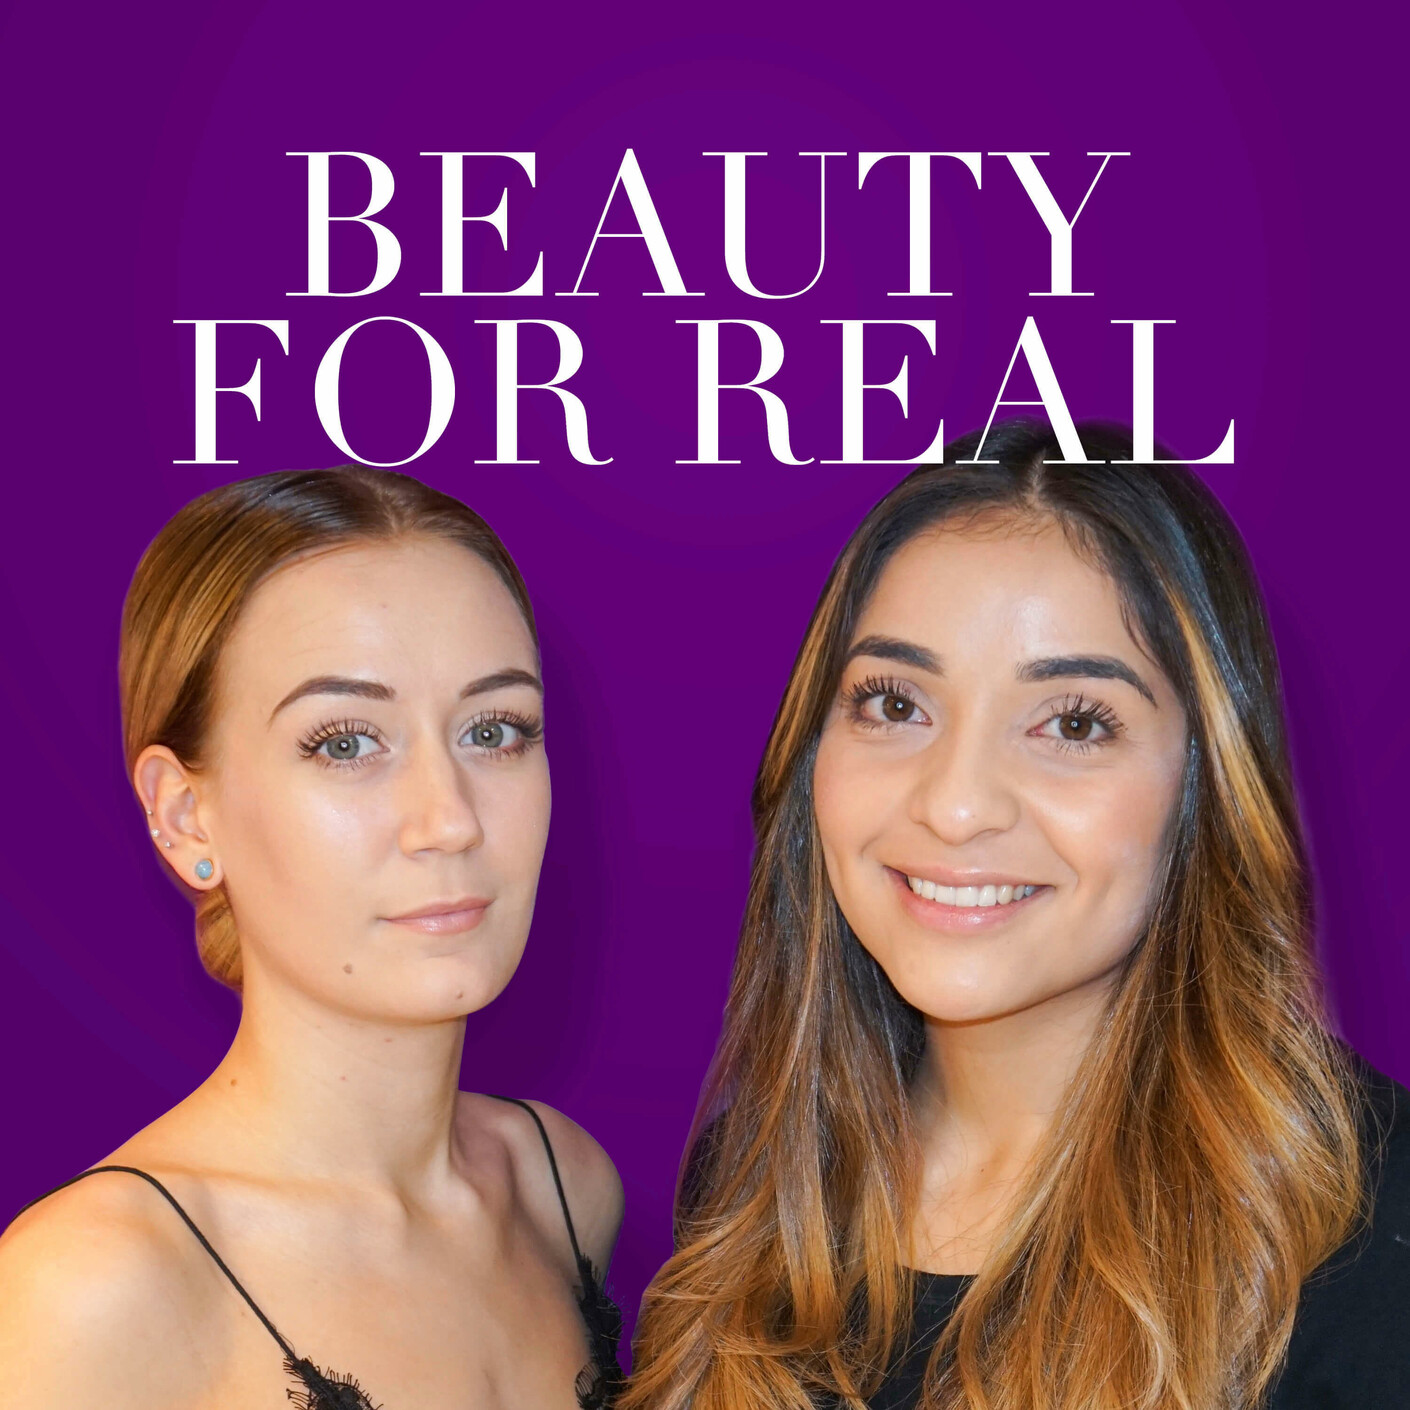 Beauty For Real by NordicFeel